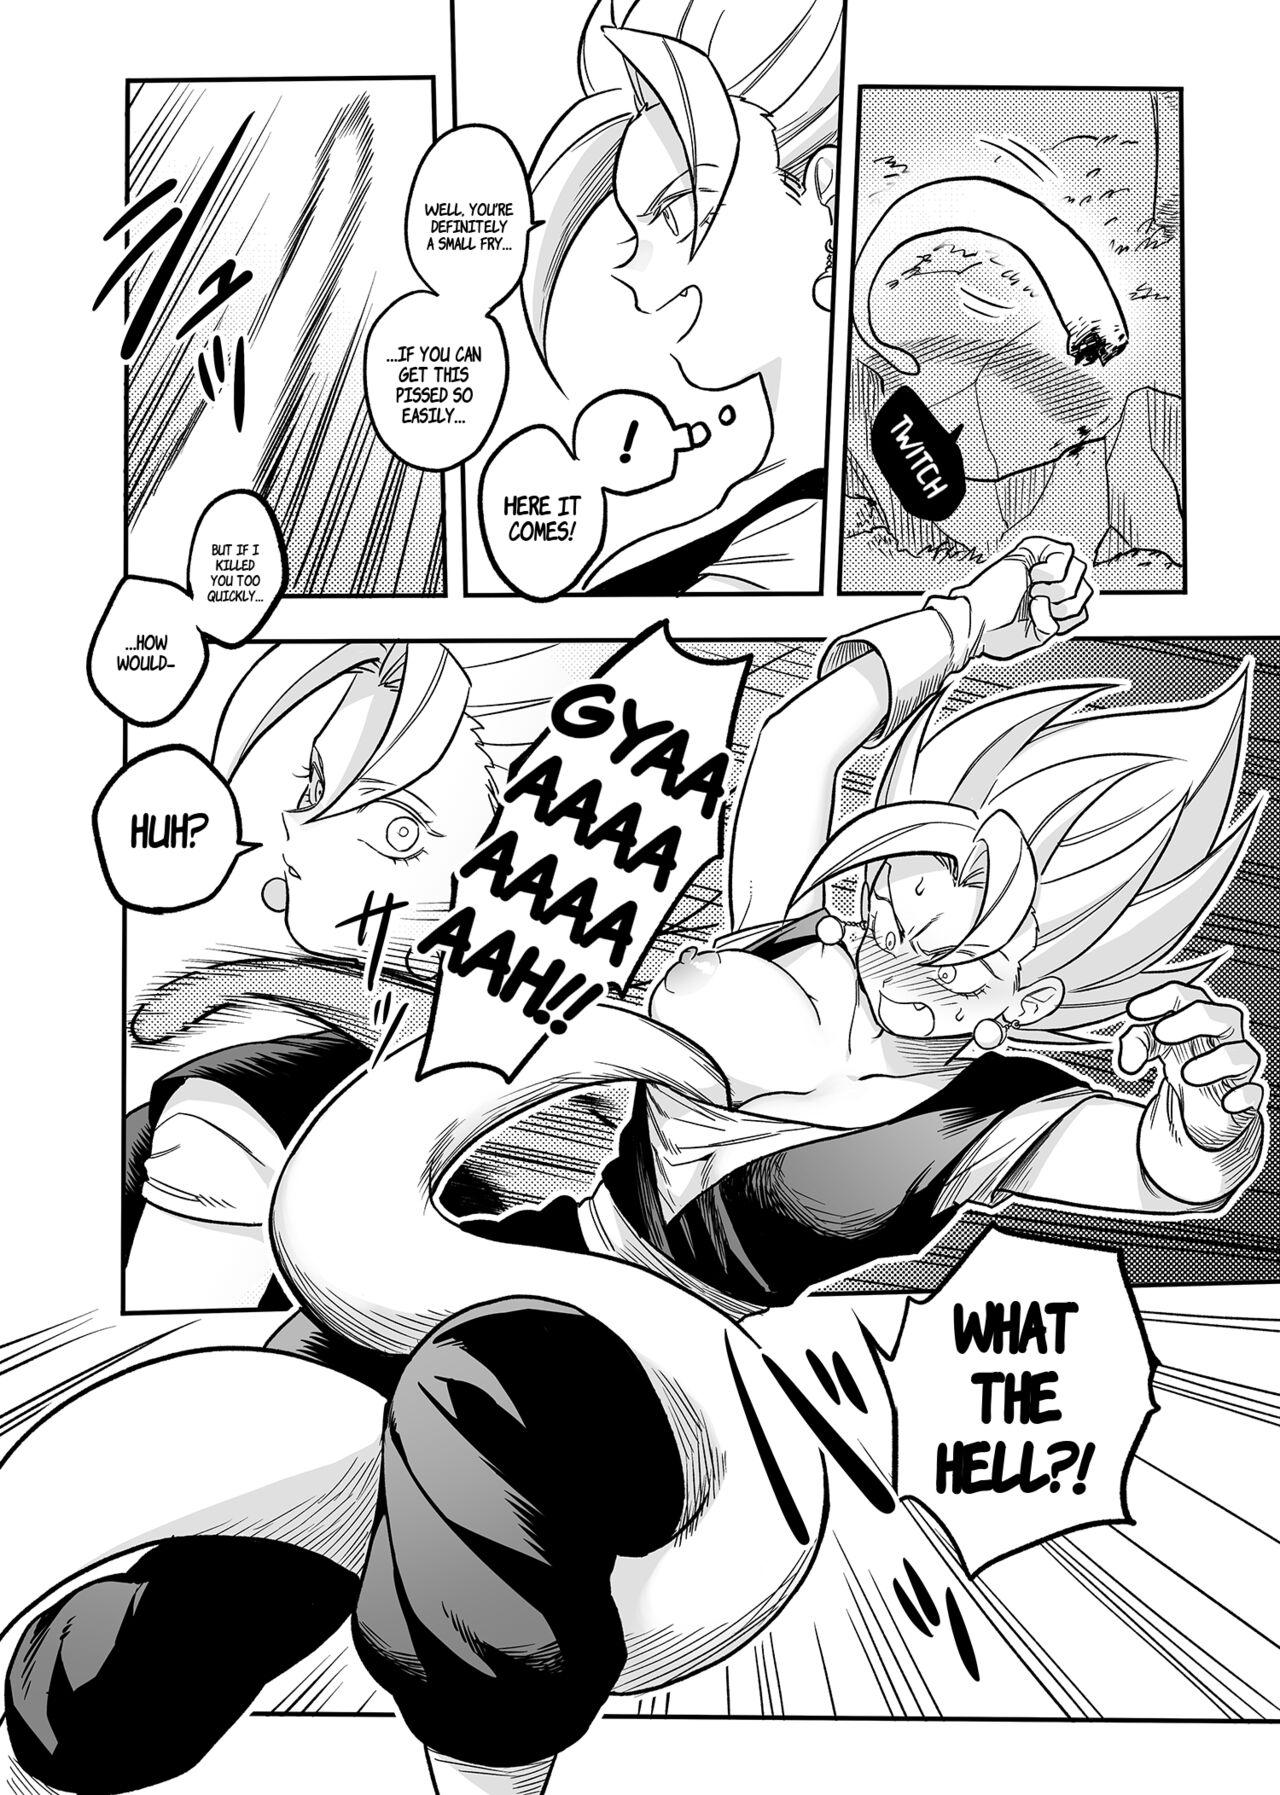 Outdoor You're Just a Small Fry Majin... - Dragon ball z Para - Page 4